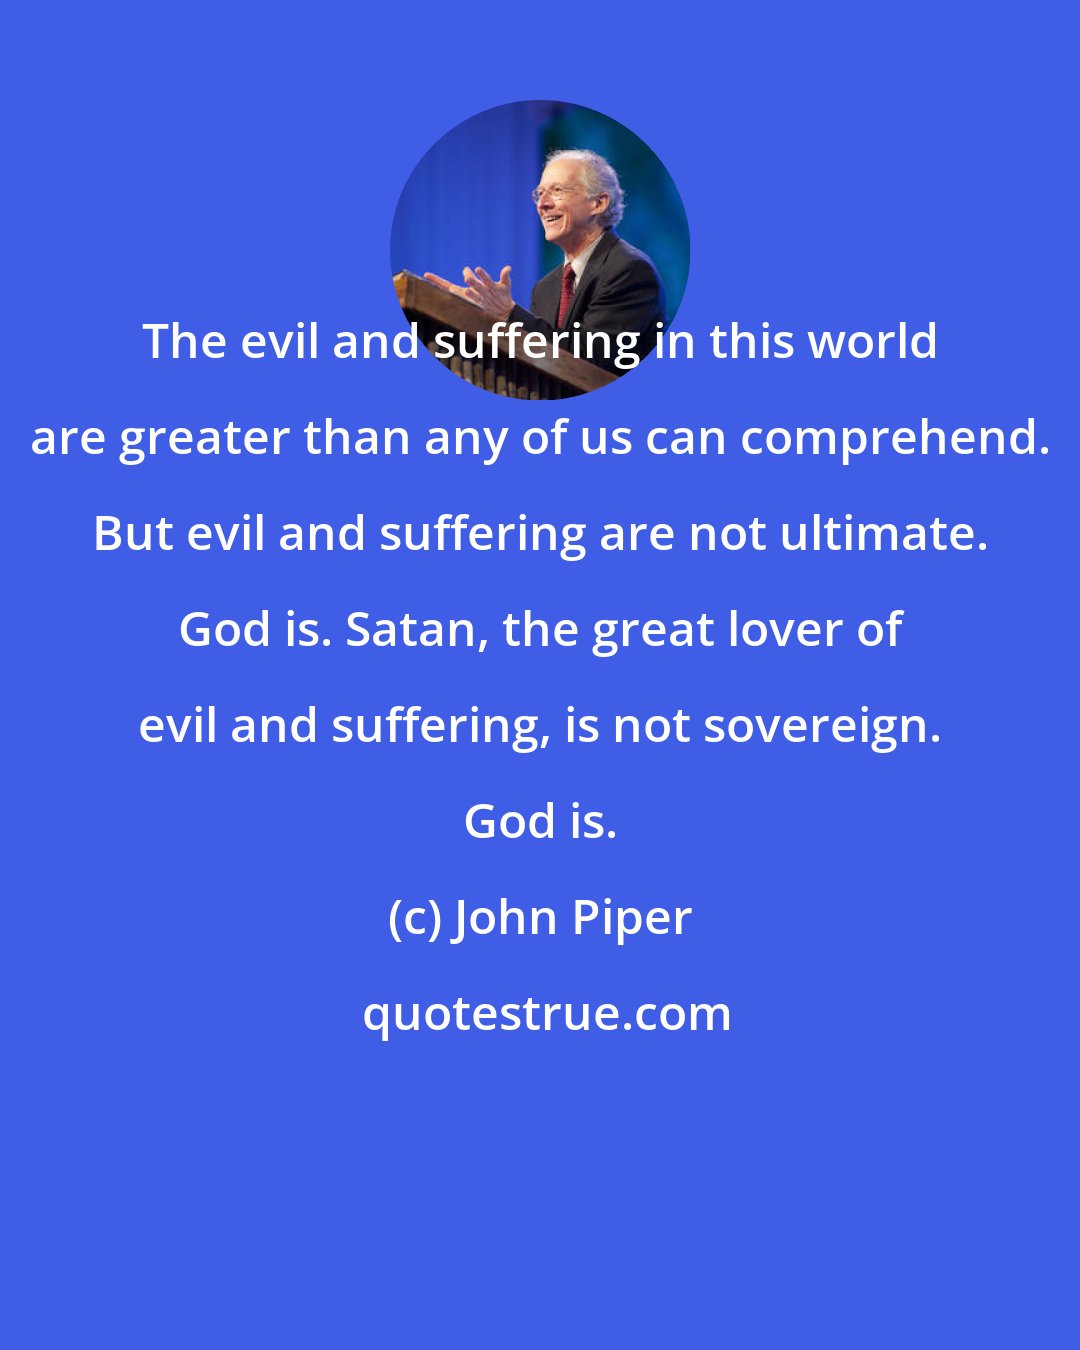 John Piper: The evil and suffering in this world are greater than any of us can comprehend. But evil and suffering are not ultimate. God is. Satan, the great lover of evil and suffering, is not sovereign. God is.